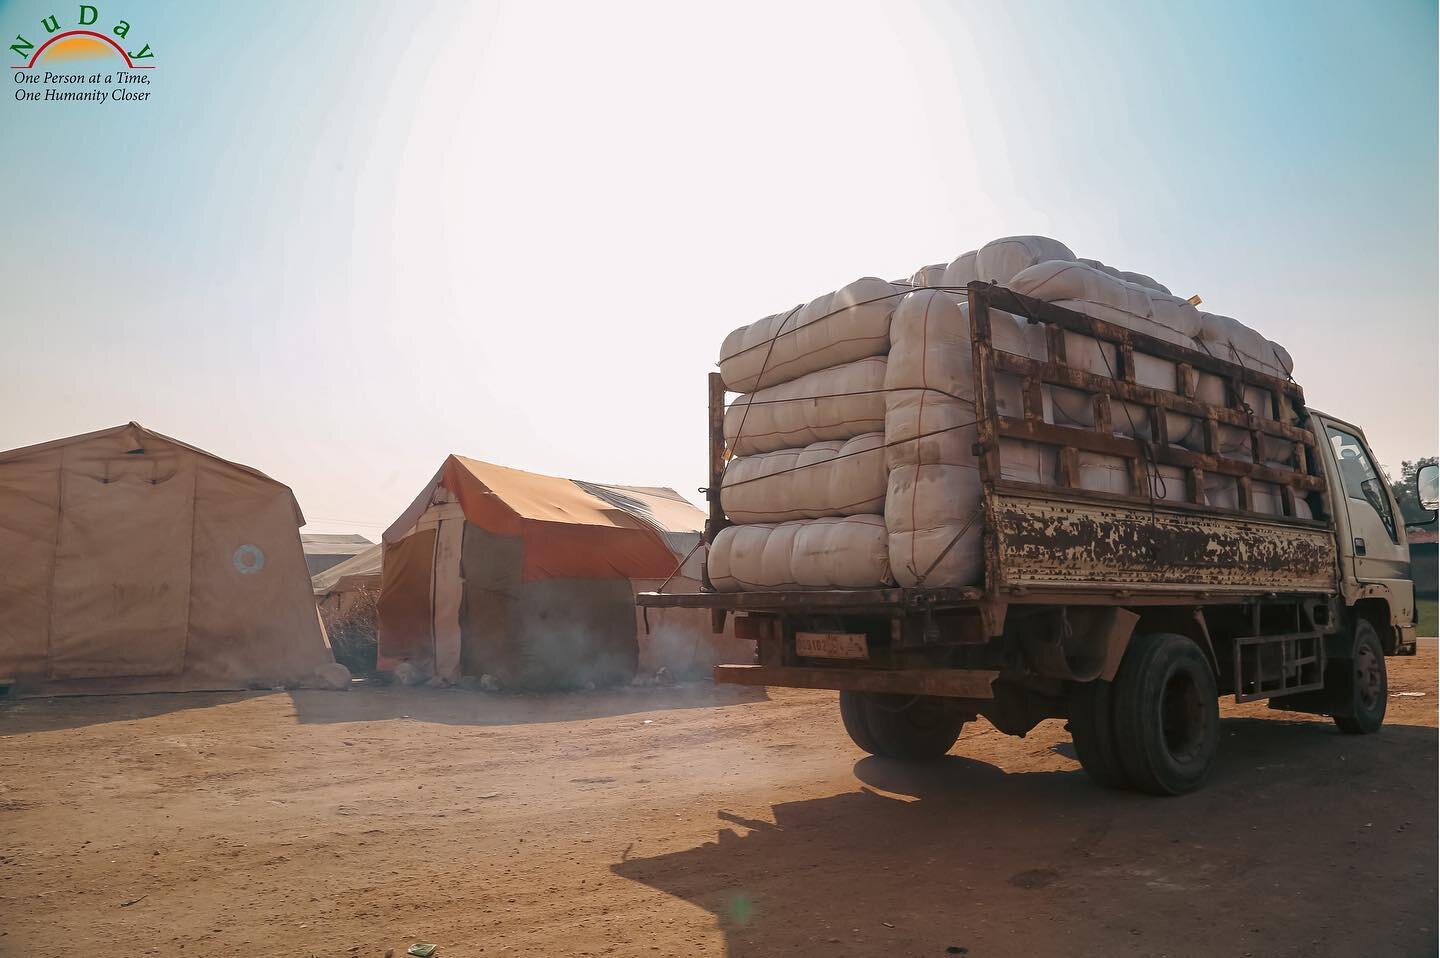 TravlerPacks arriving in an informal tent settlement for distribution in Idlib, Syria by our on-the-ground partner NuDay during January 2023.

TravlerPack provides a sustainable and cost effective solution to address challenges staying warm during co